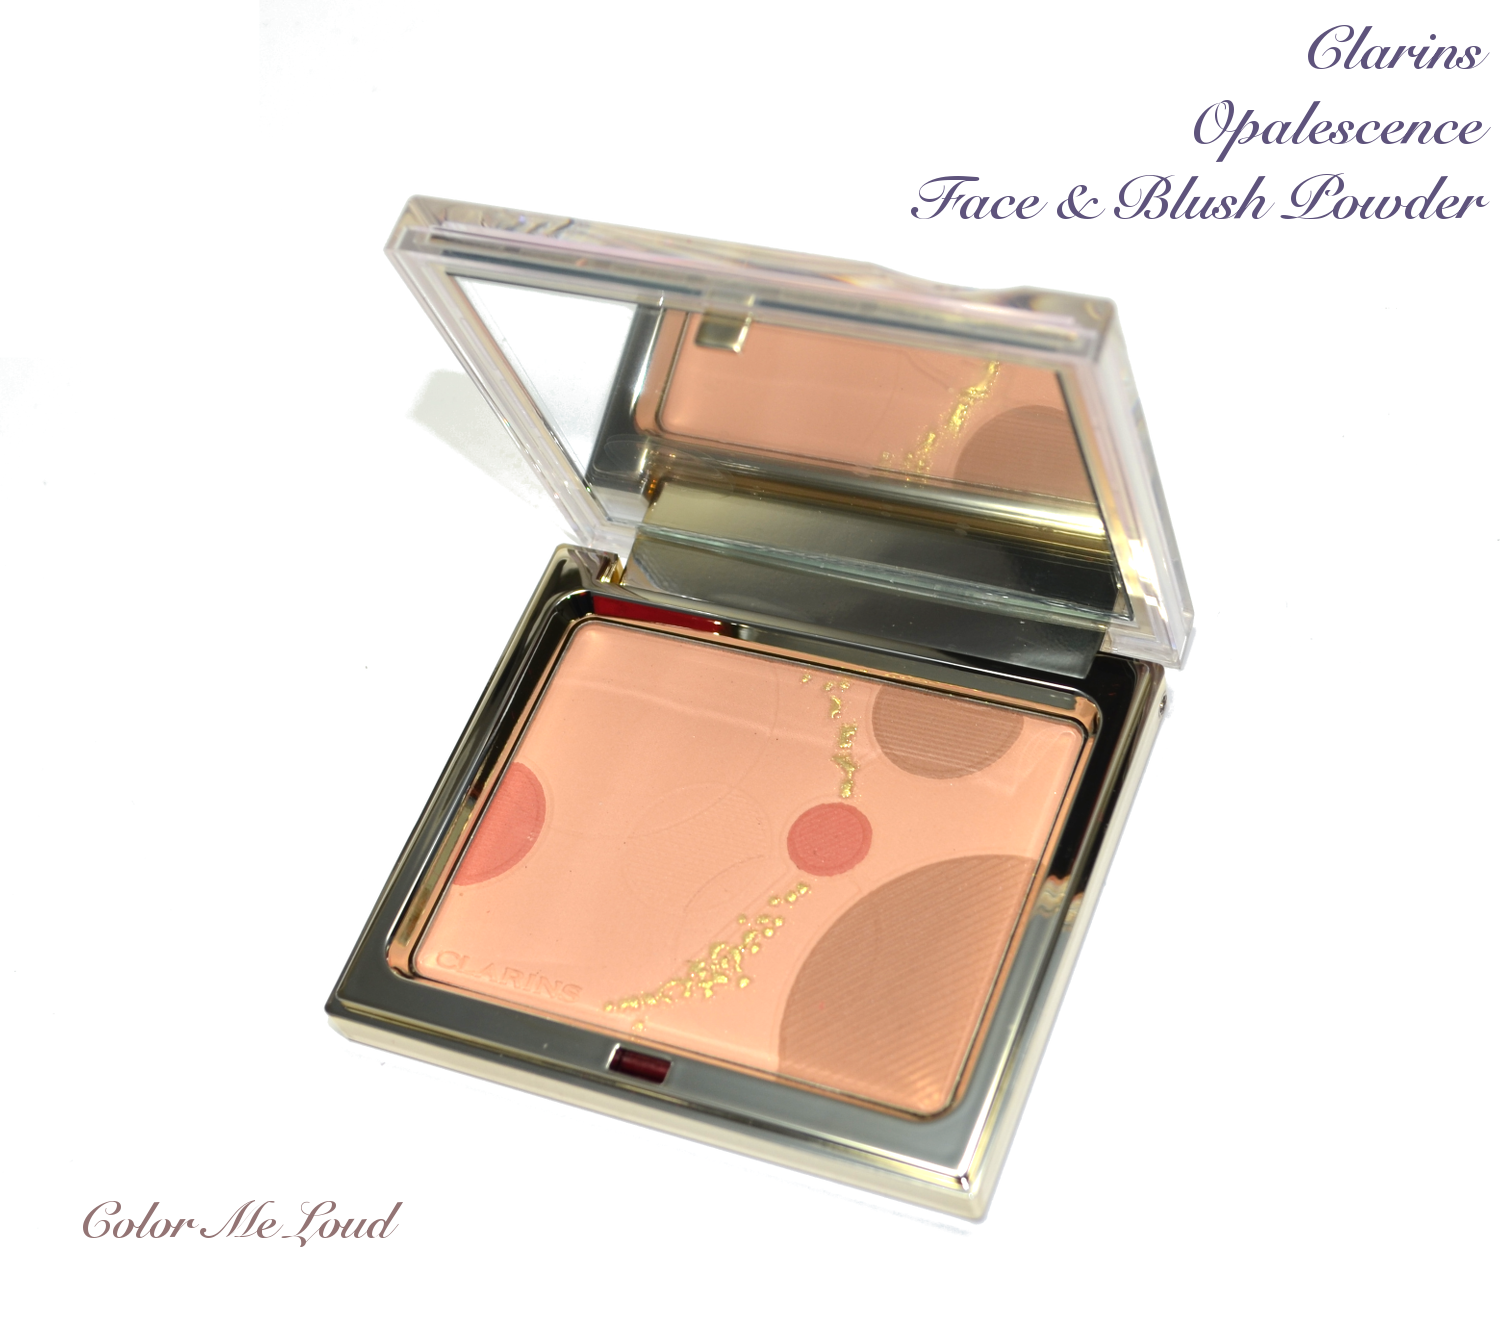 Clarins Opalescence Face & Blush Powder from Opalescence Collection for Spring 2014, Swatches & Comparison